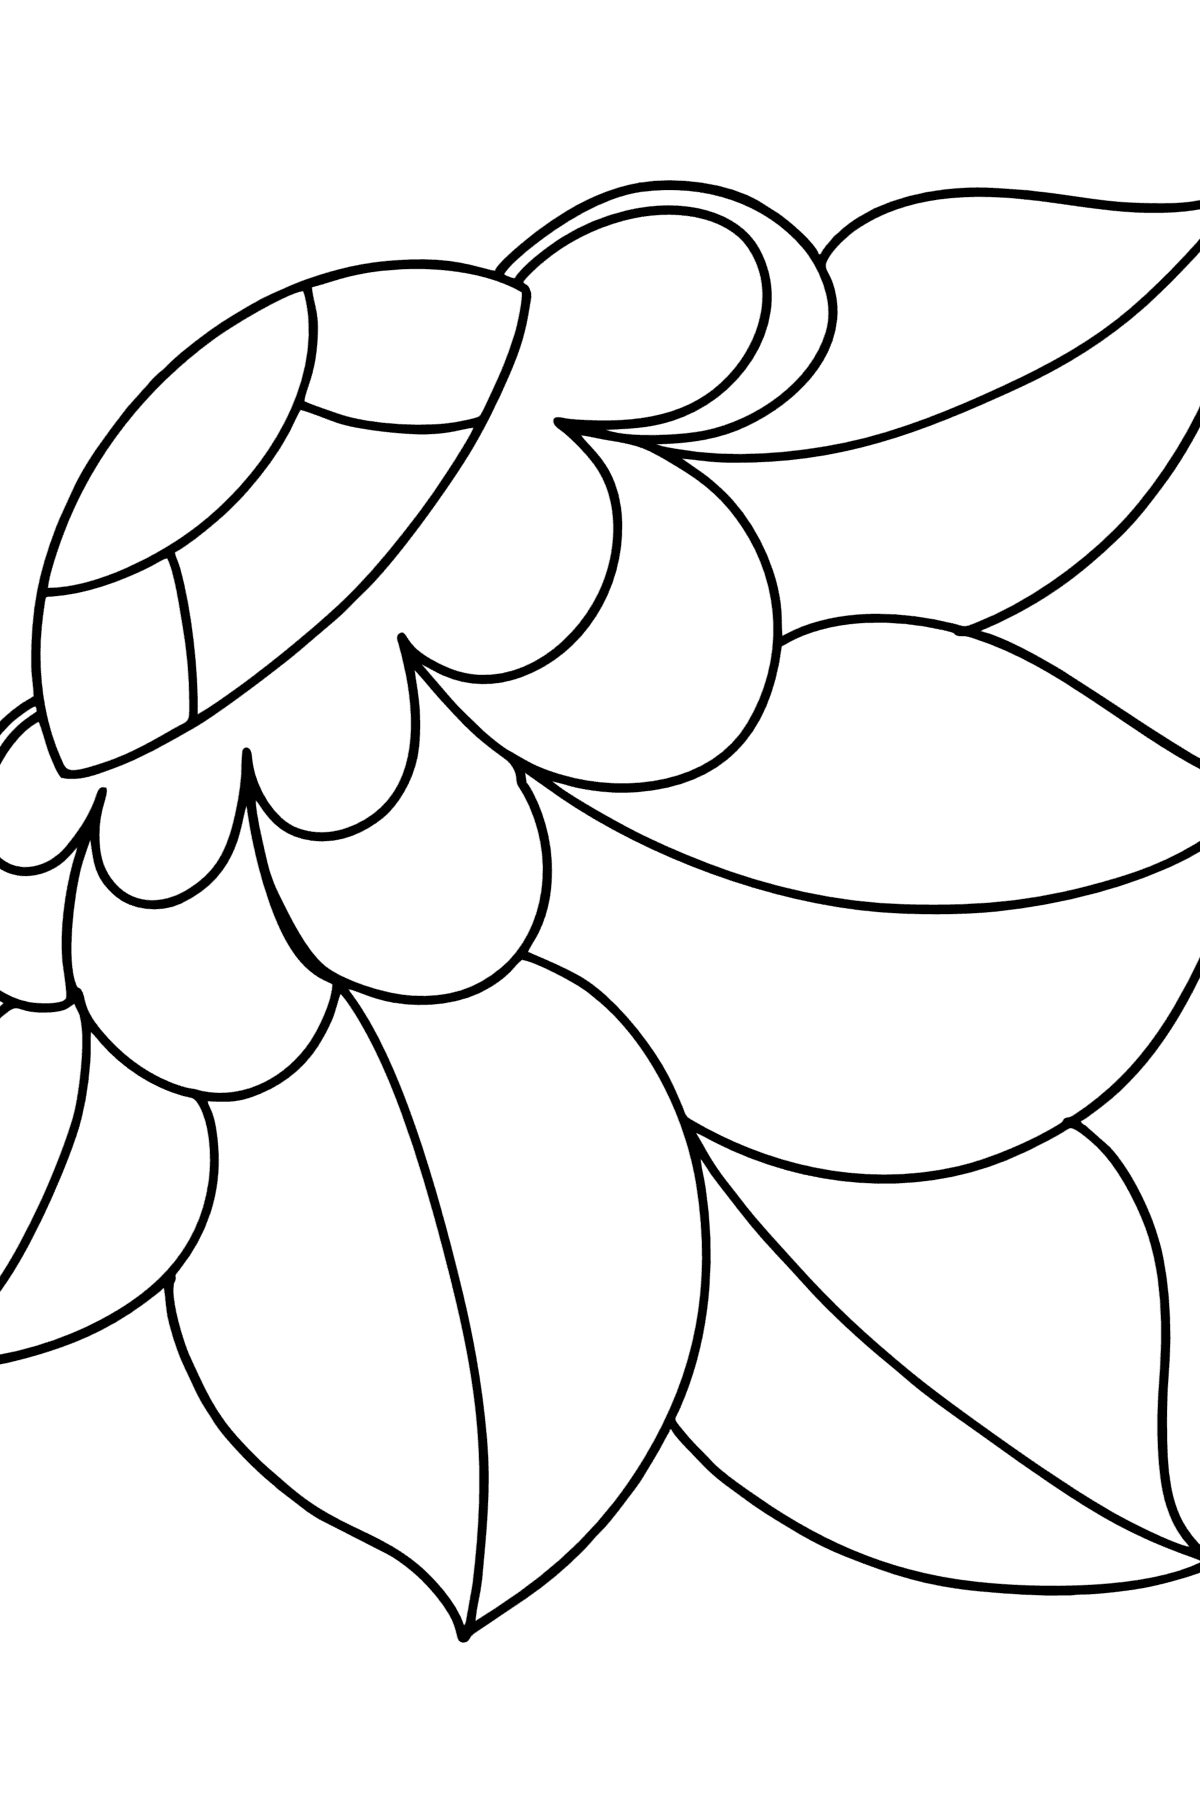 Zentangle Floral Pattern coloring pages - Coloring Pages for Kids